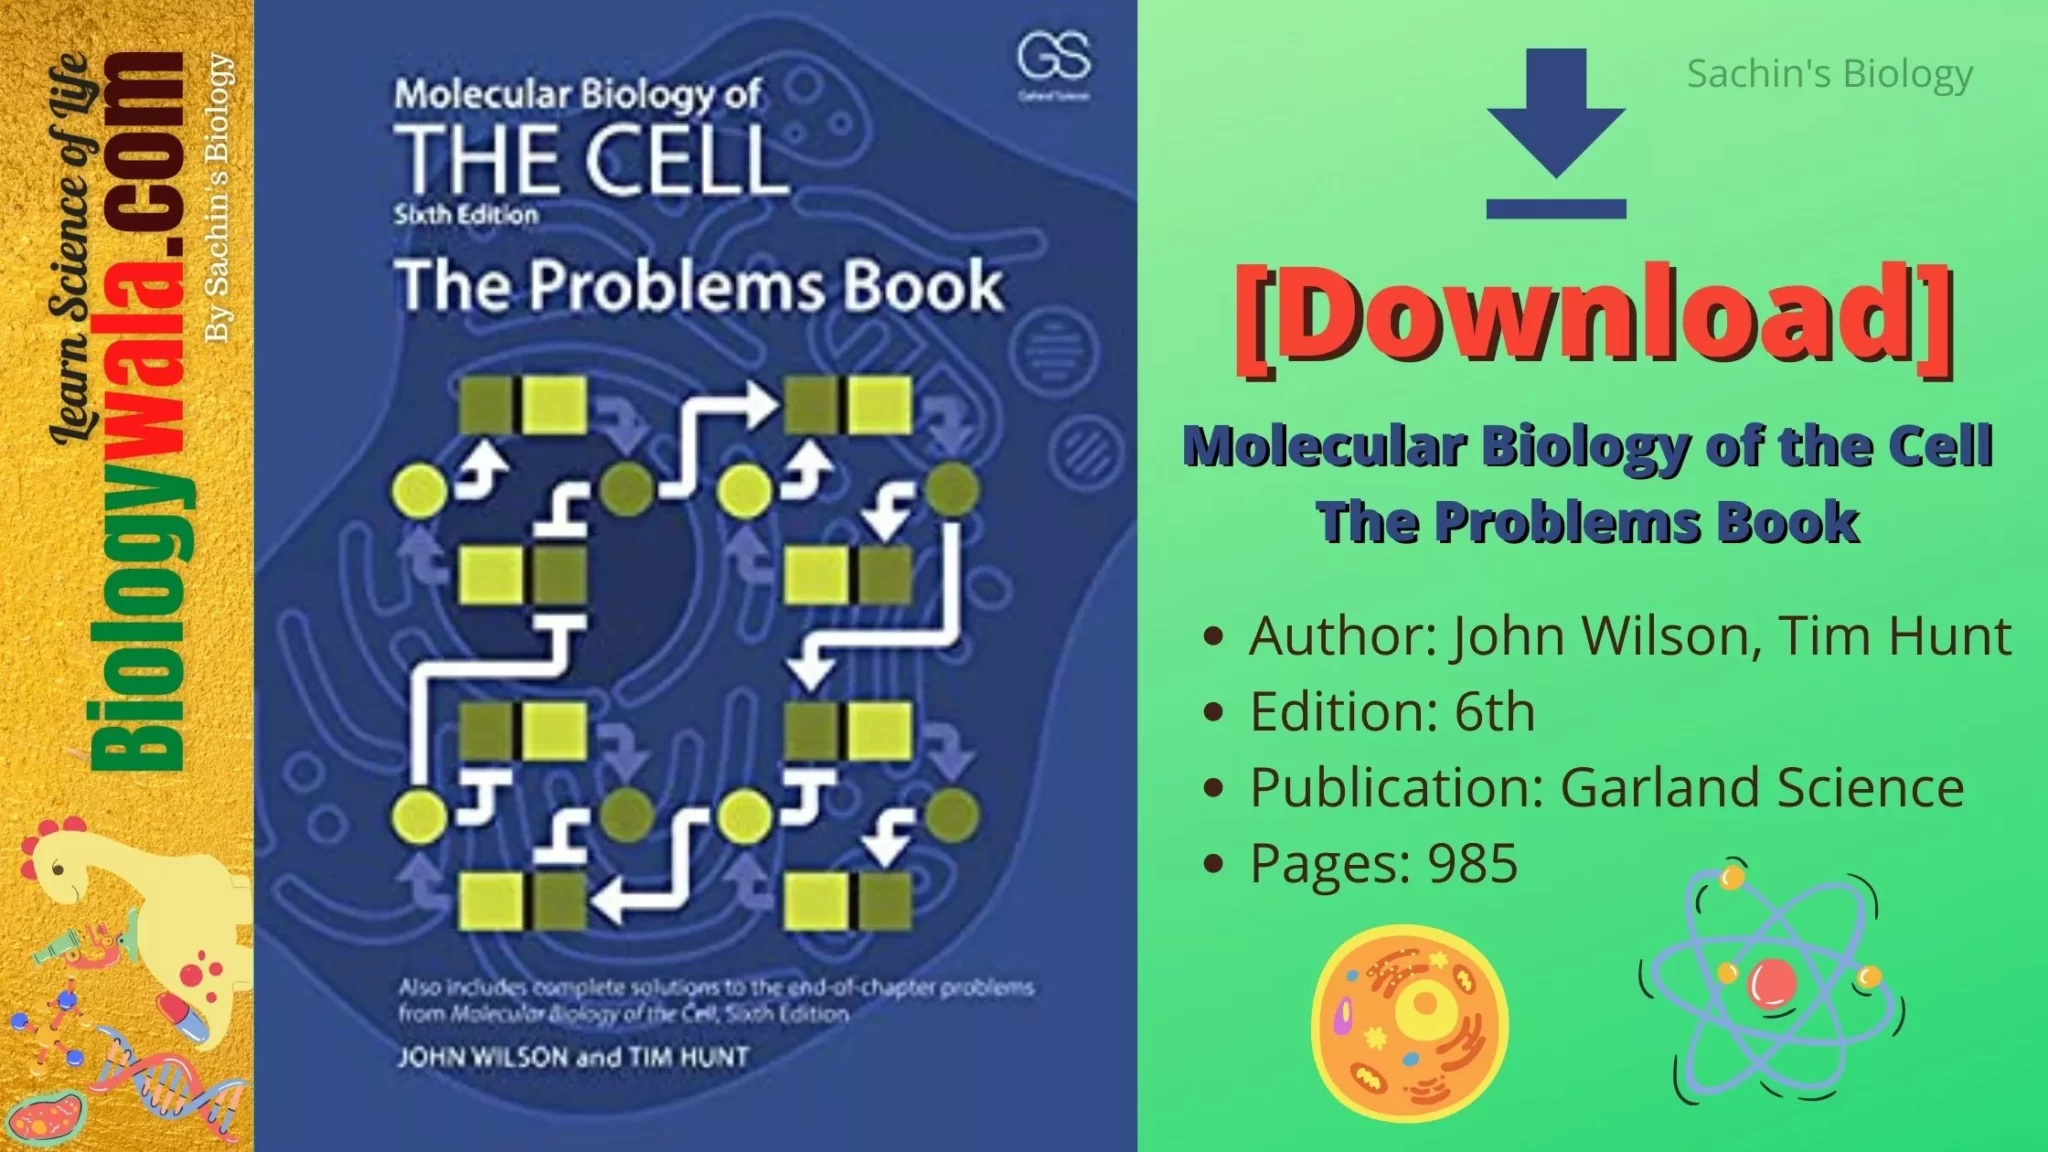 [PDF] Molecular Biology of the Cell The Problems Book 6th edition by John Wilson Tim Hunt